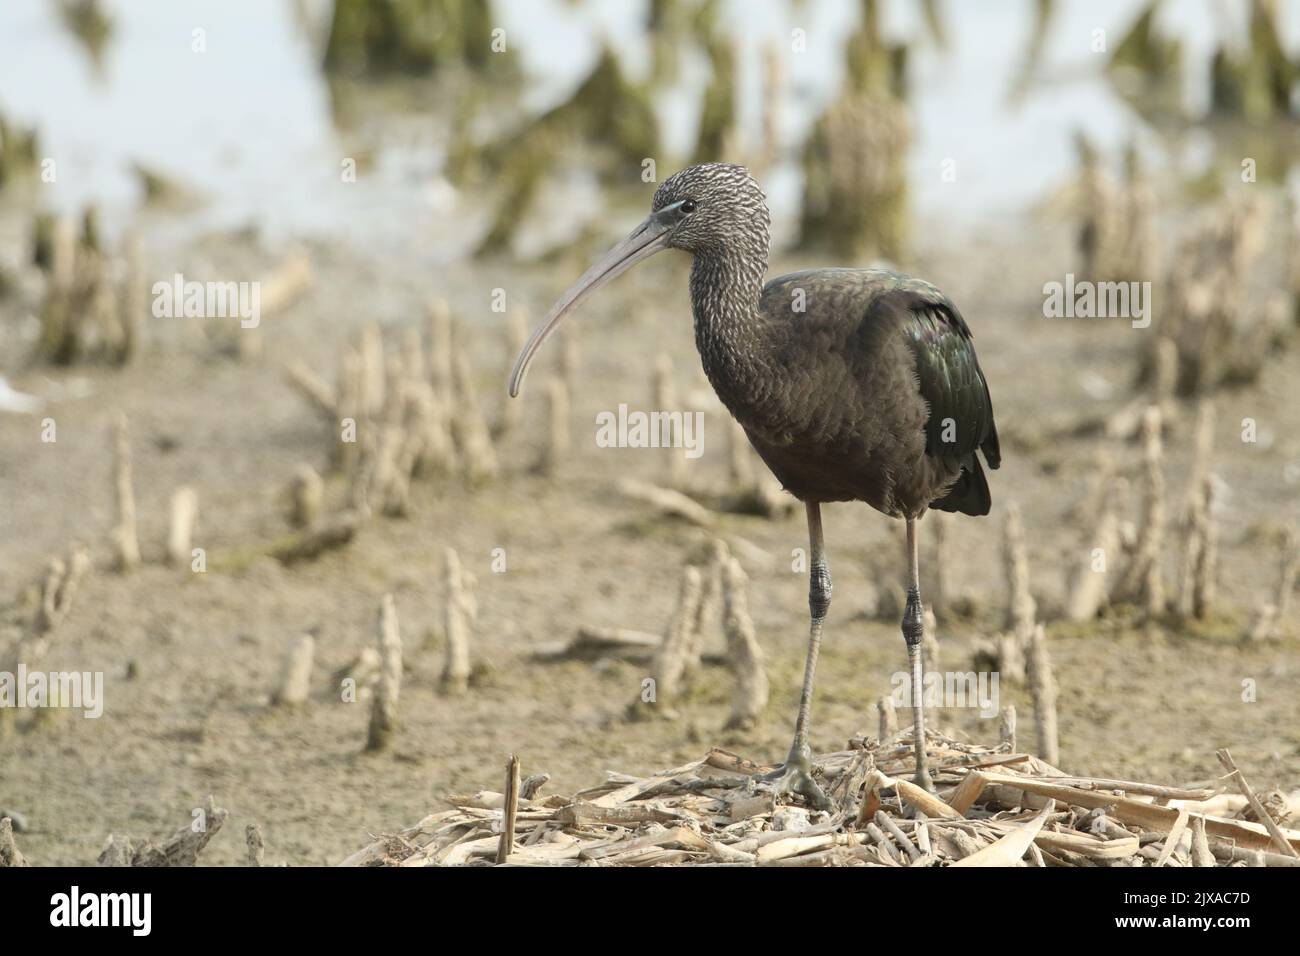 A rare Glossy Ibis, Plegadis falcinellus, standing on an old bird's nest on an island in a lake. Stock Photo